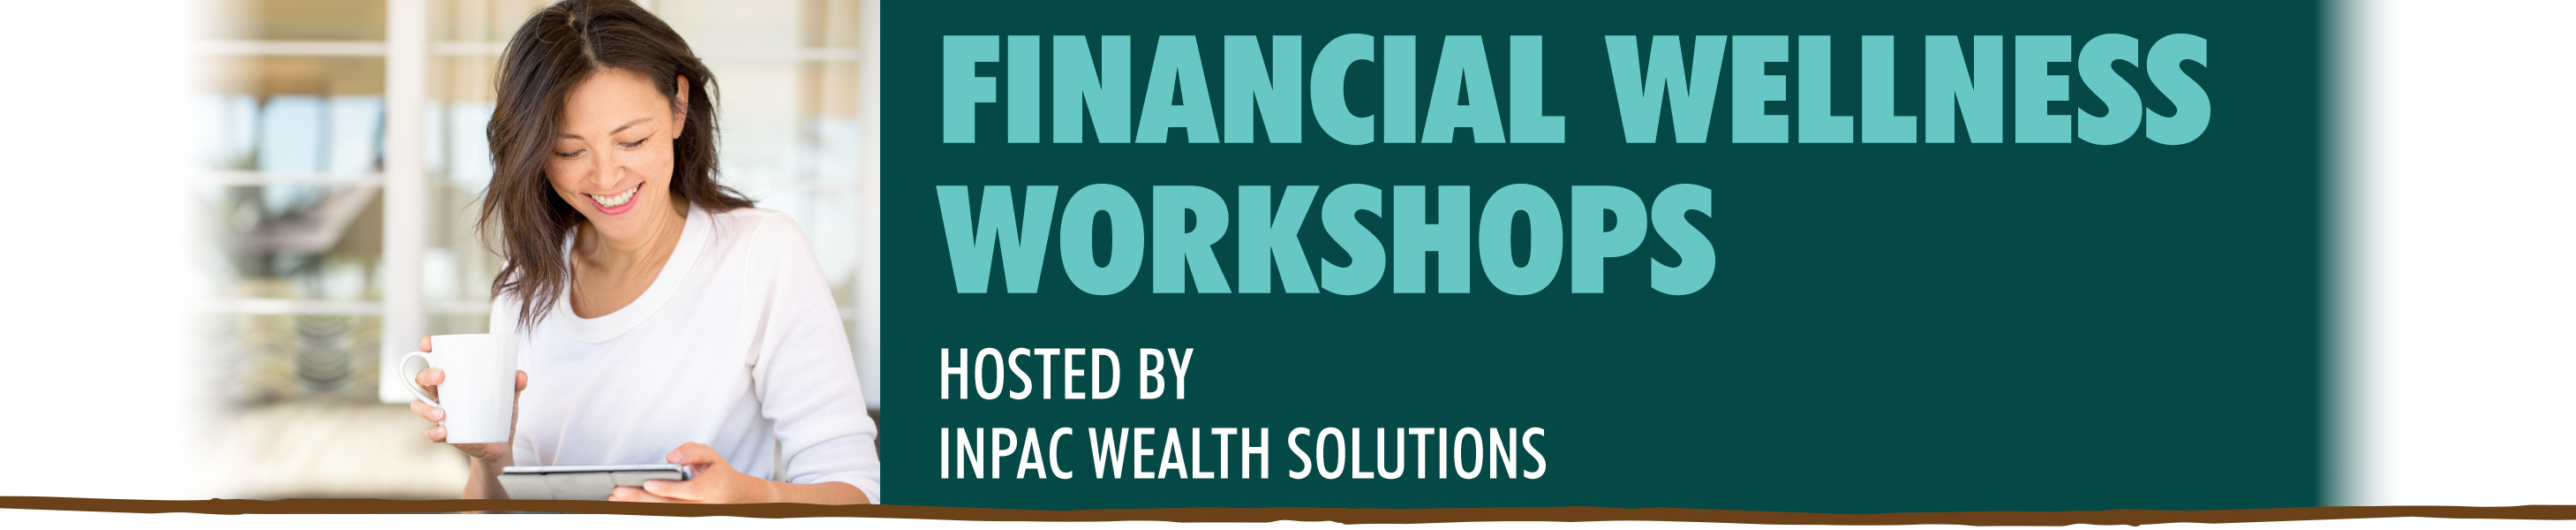 Financial Wellness Workshops, hosted by INPAC Wealth Solutions